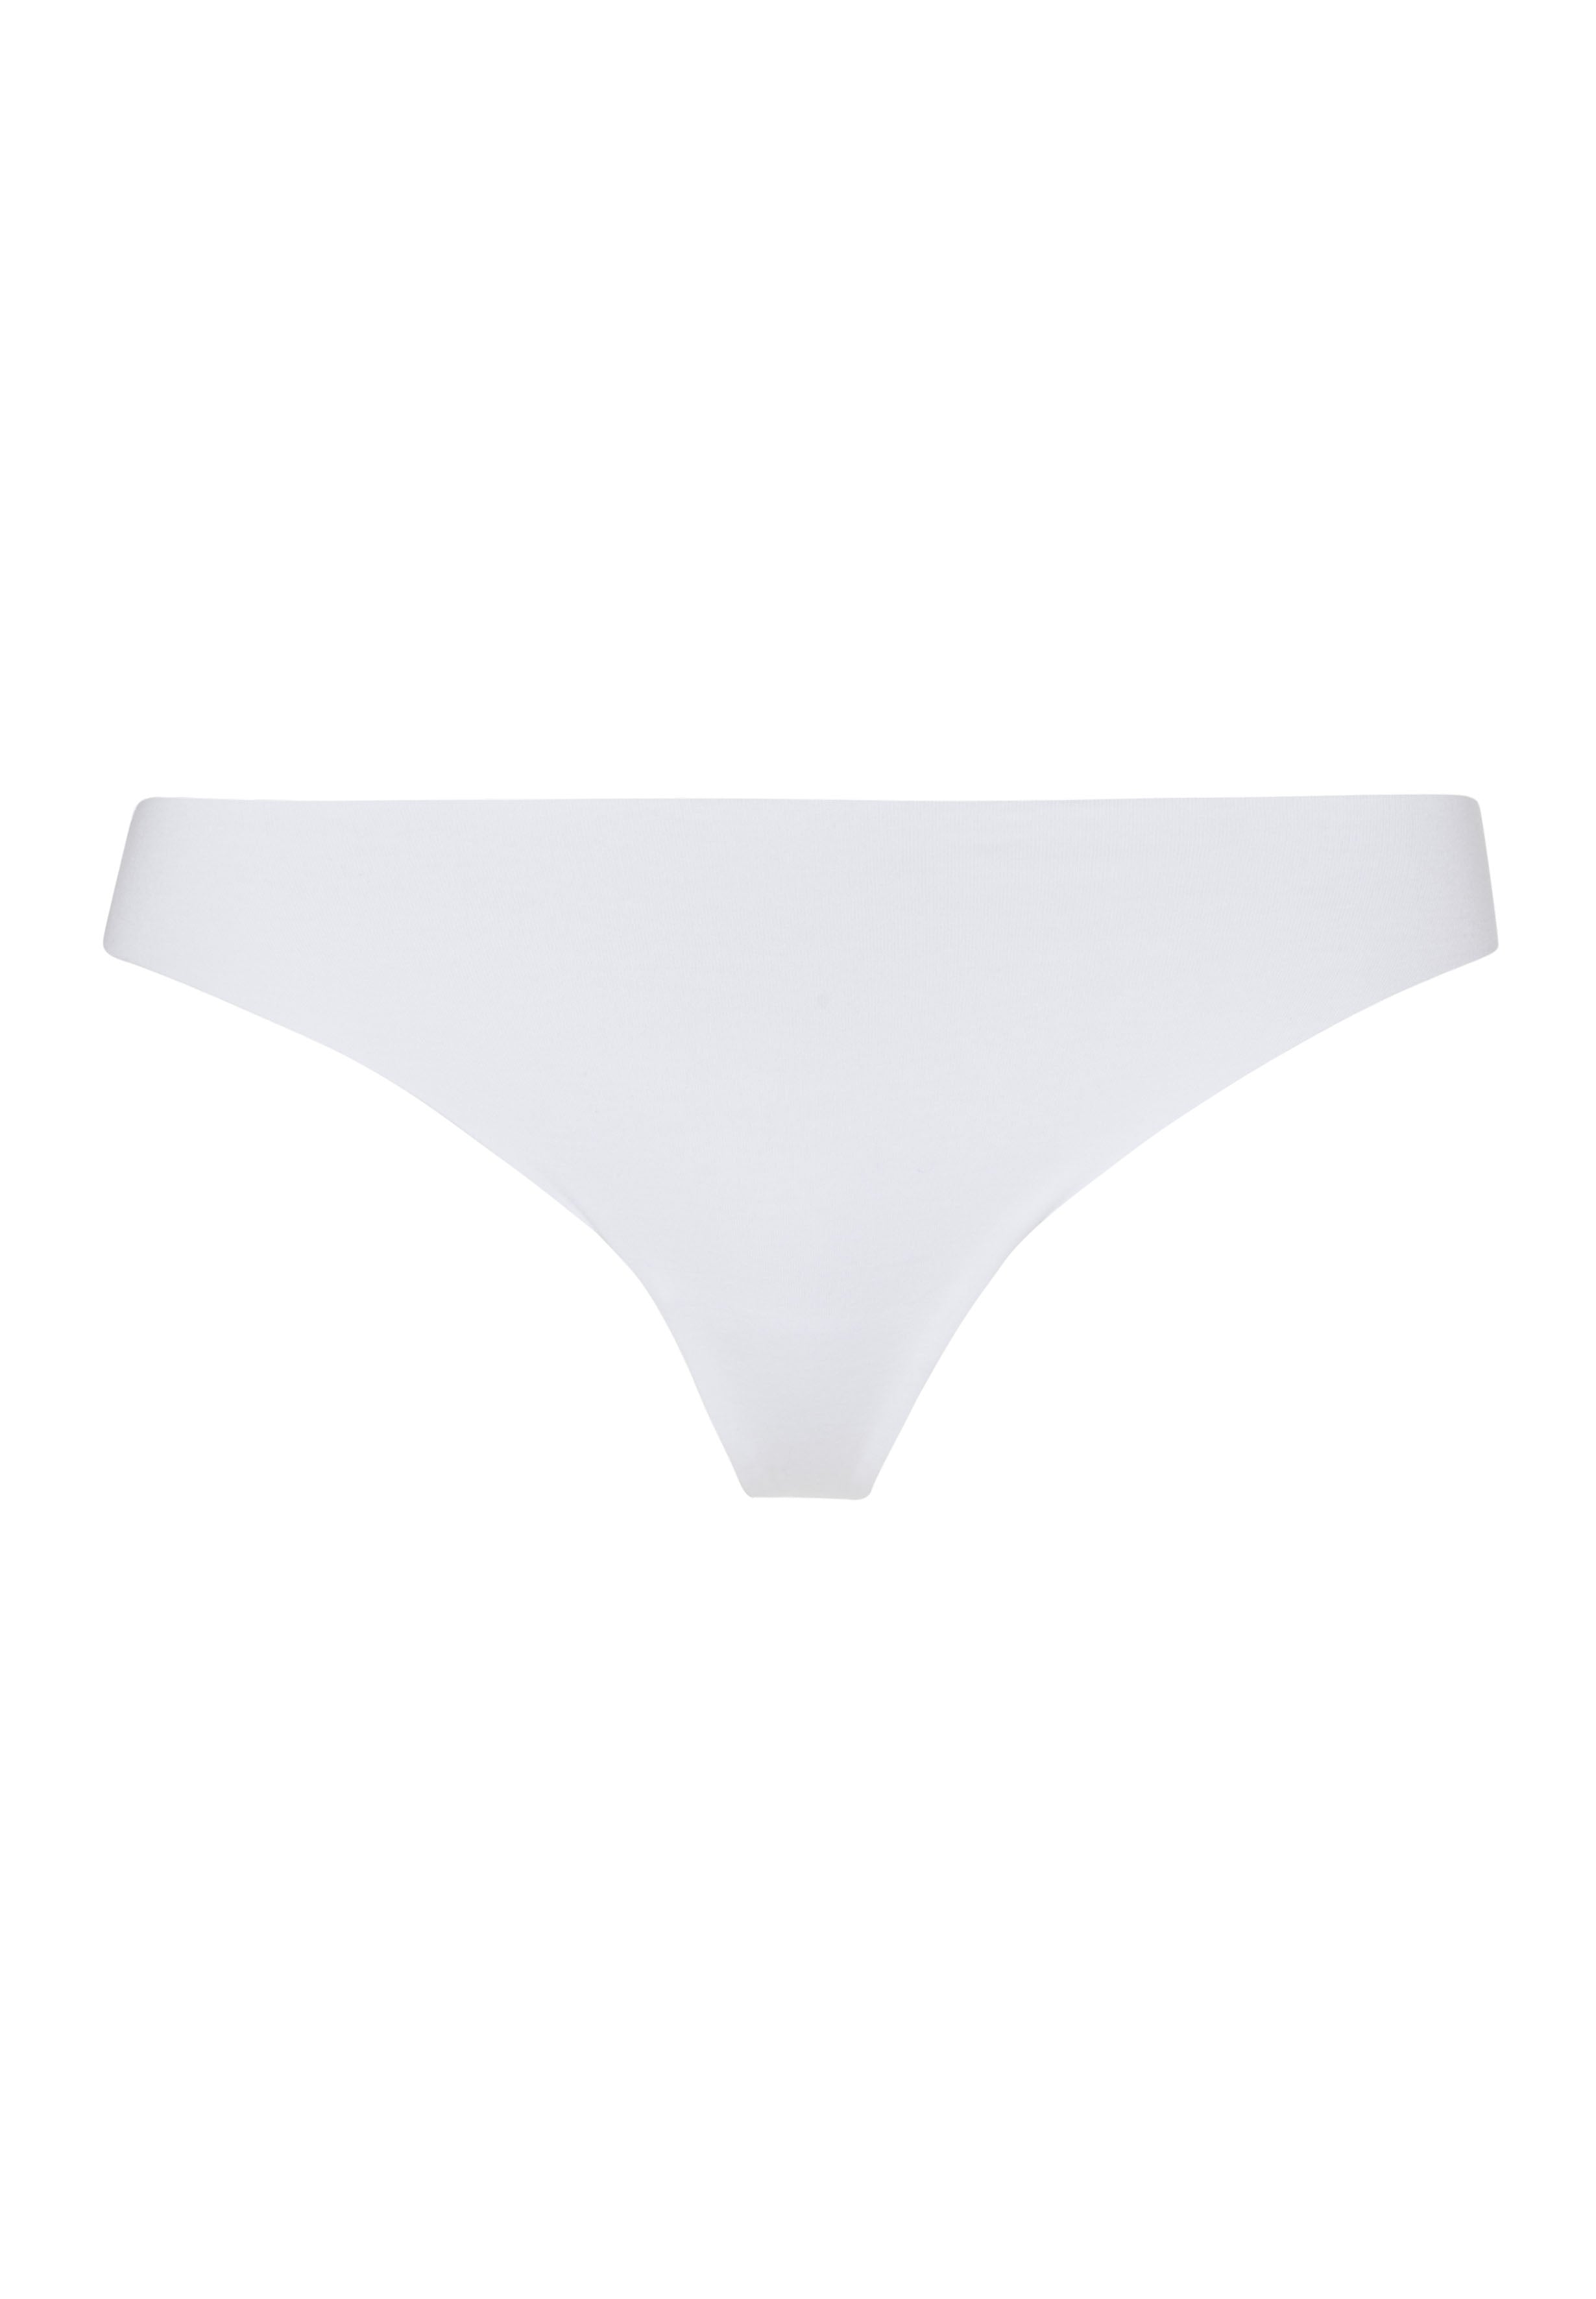 71225 Invisible Cotton Thong - 101 White